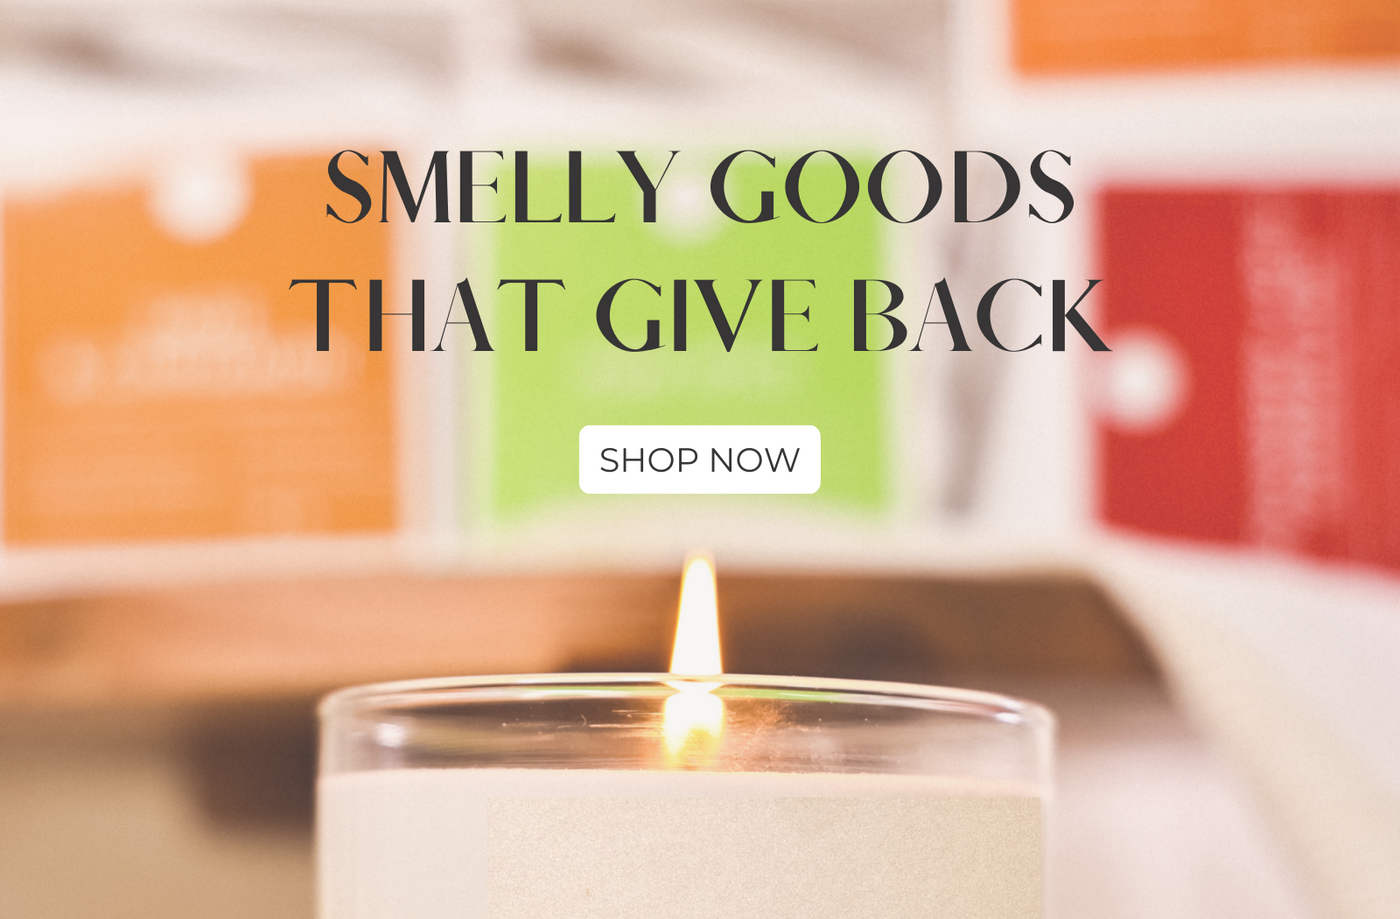 Feeding the world - one candle at a time. – Feya Candles